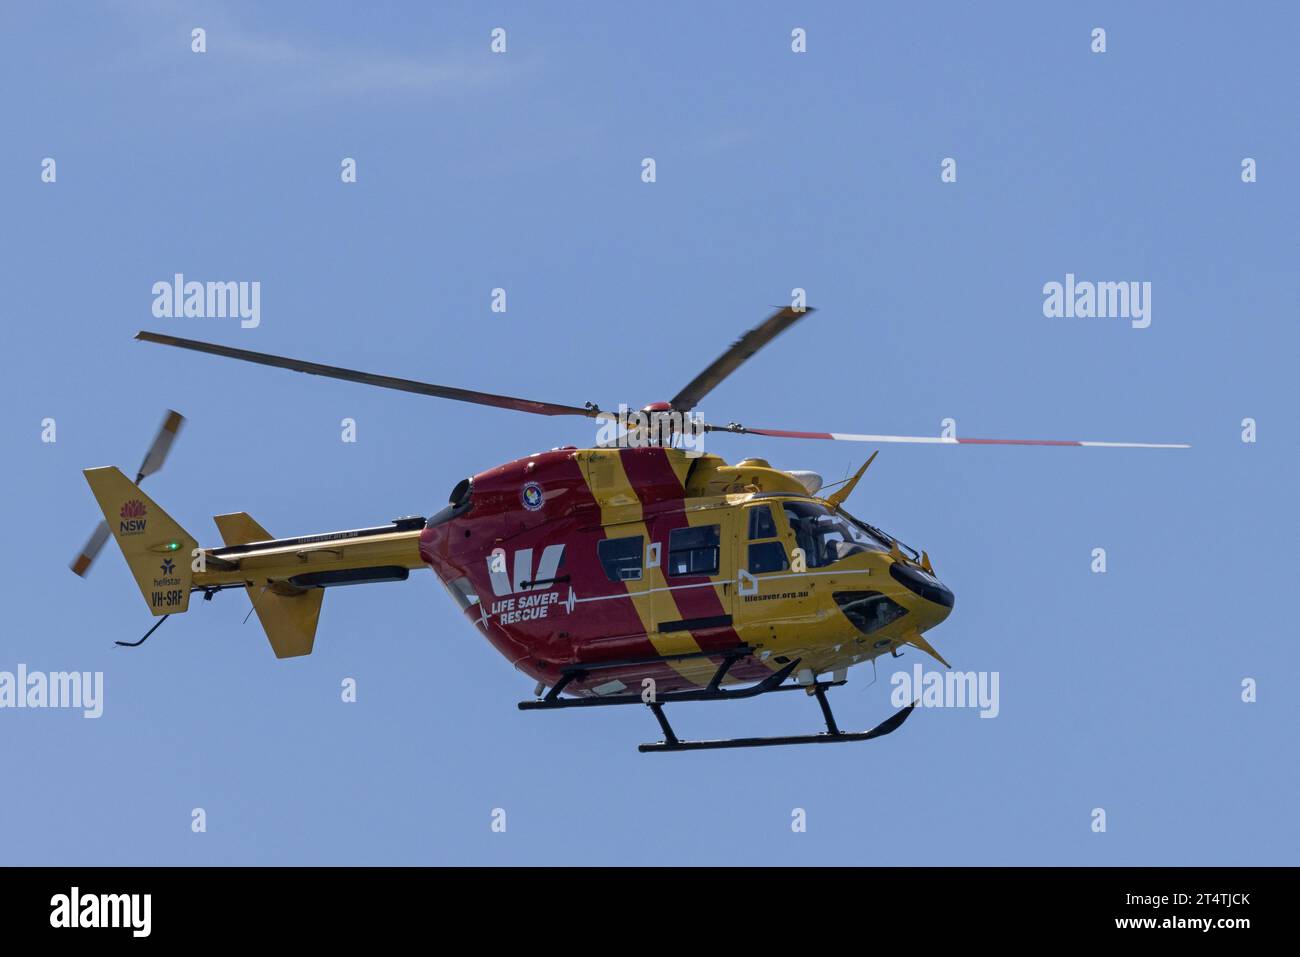 Australian Westpac lifesaver rescue helicopter Stock Photo